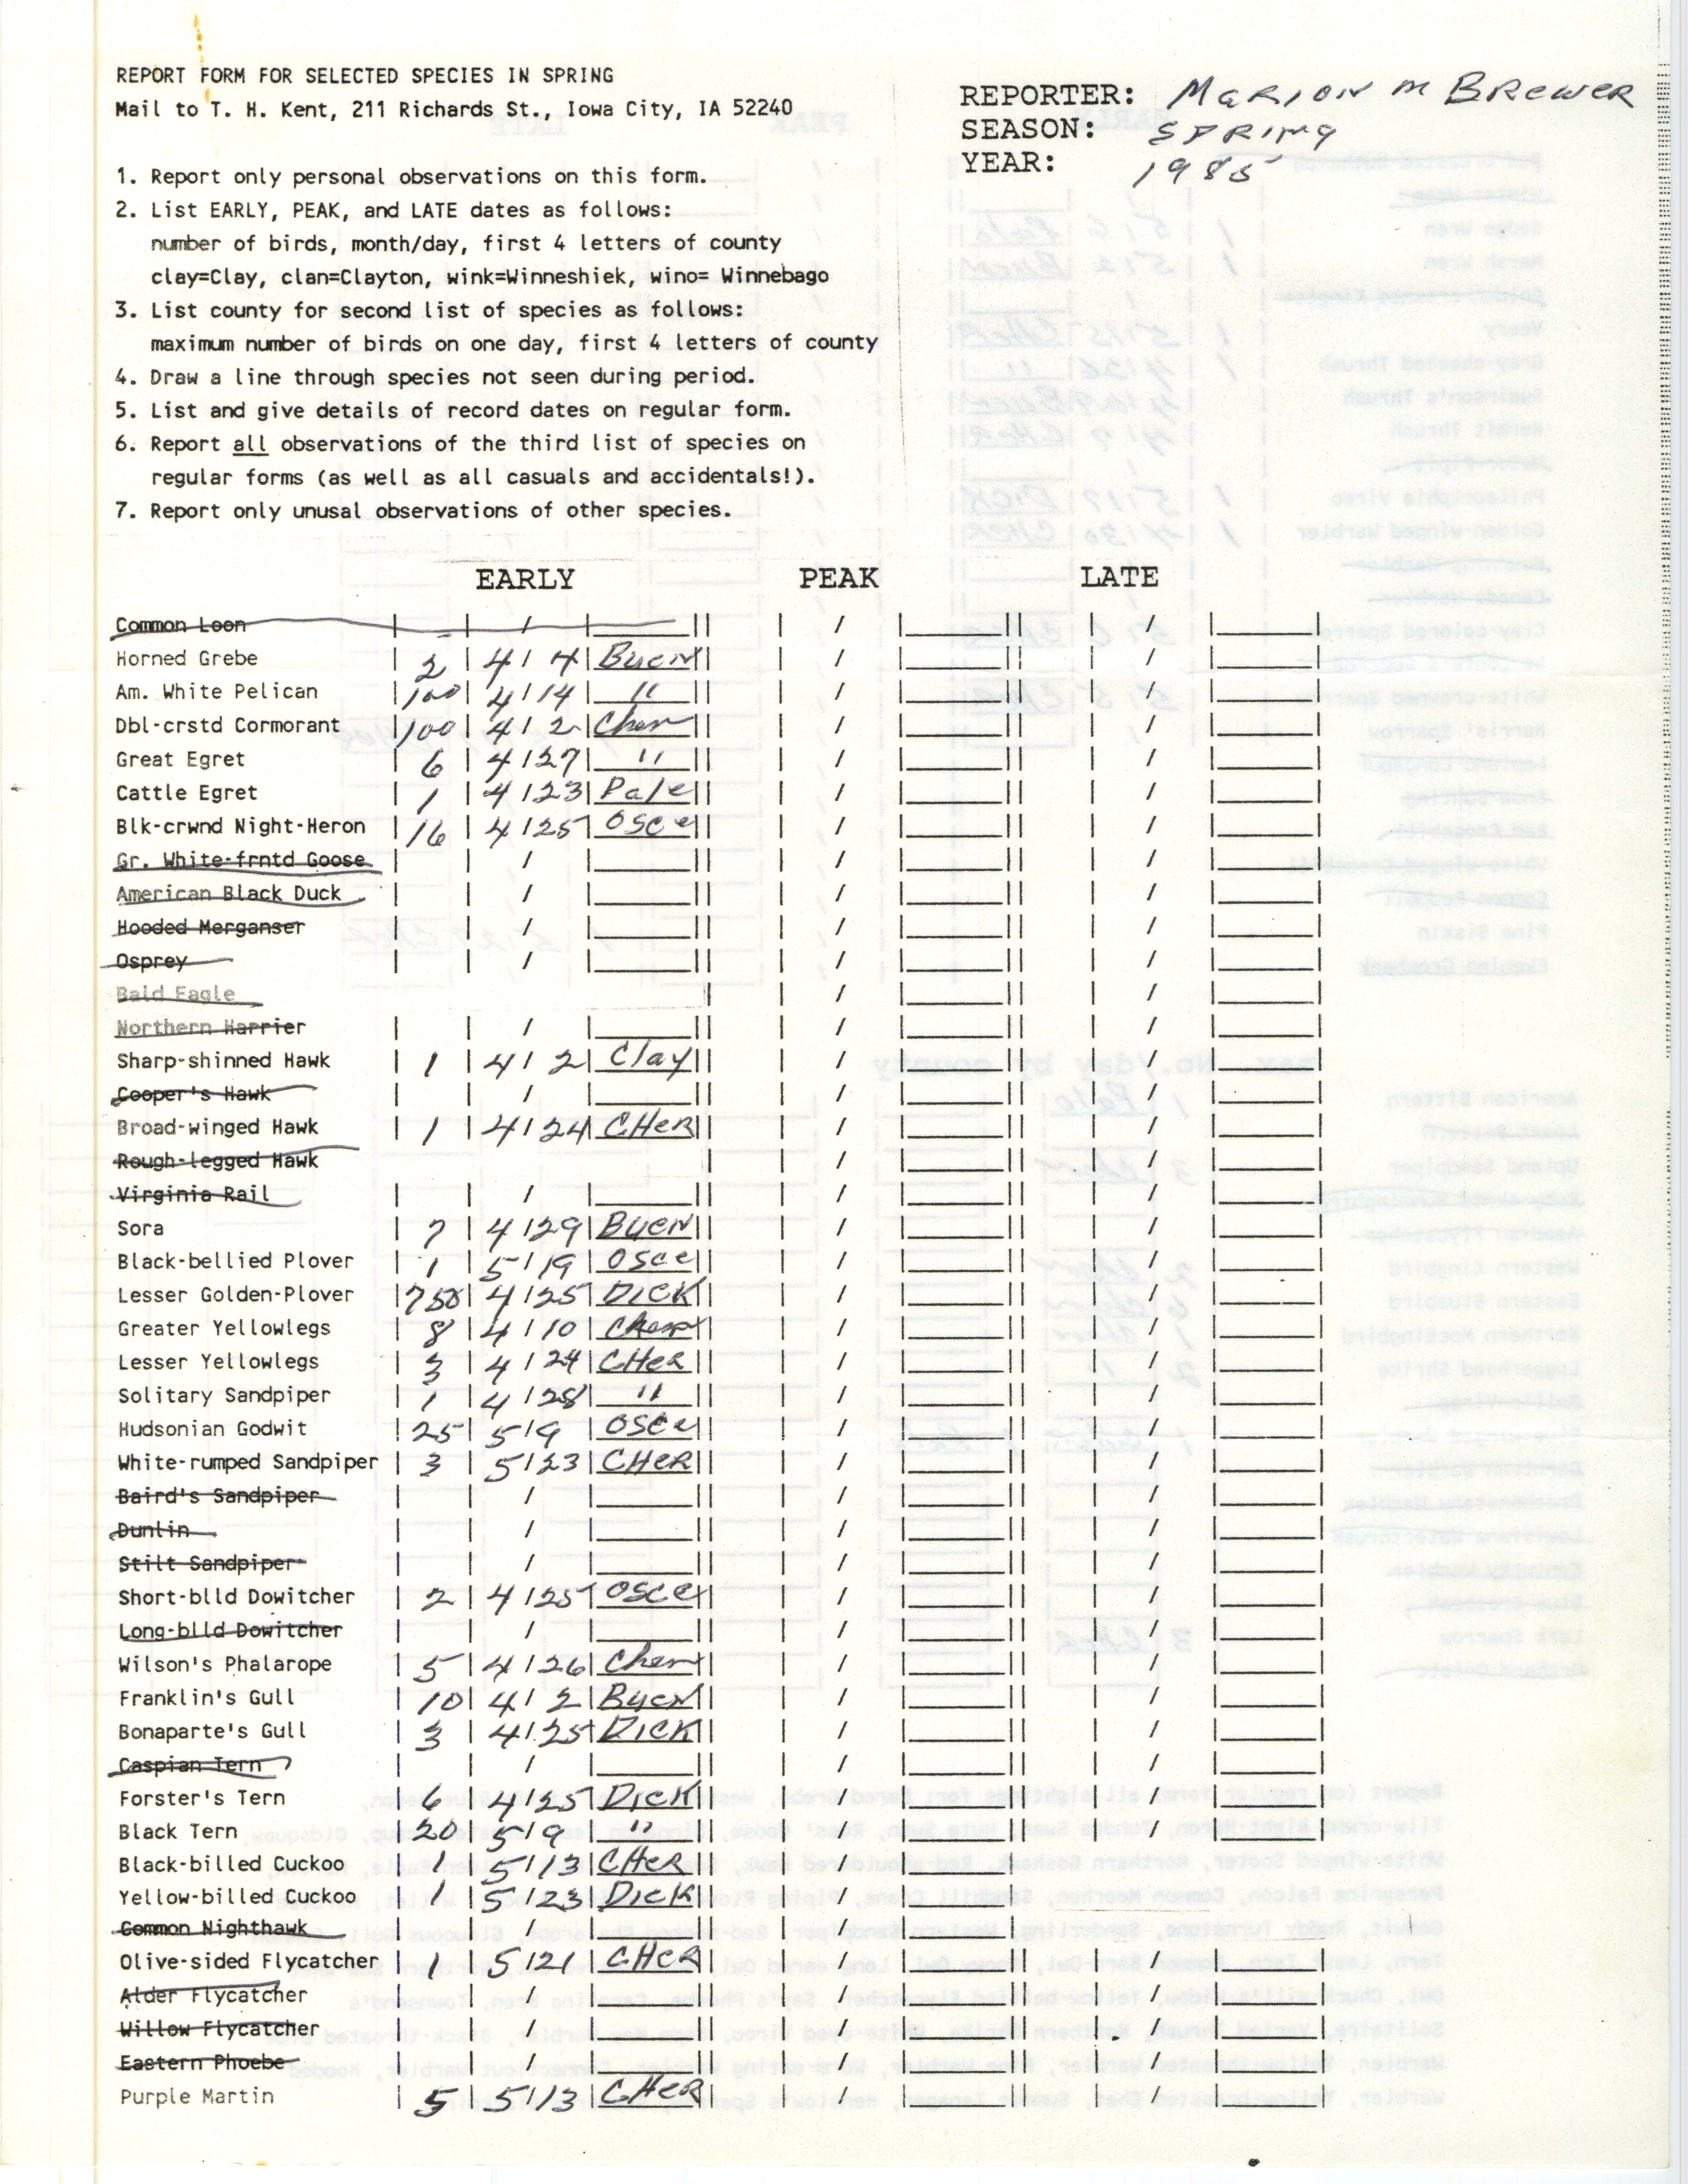 Report form for selected species in spring, contributed by Marion M. Brewer, spring 1985